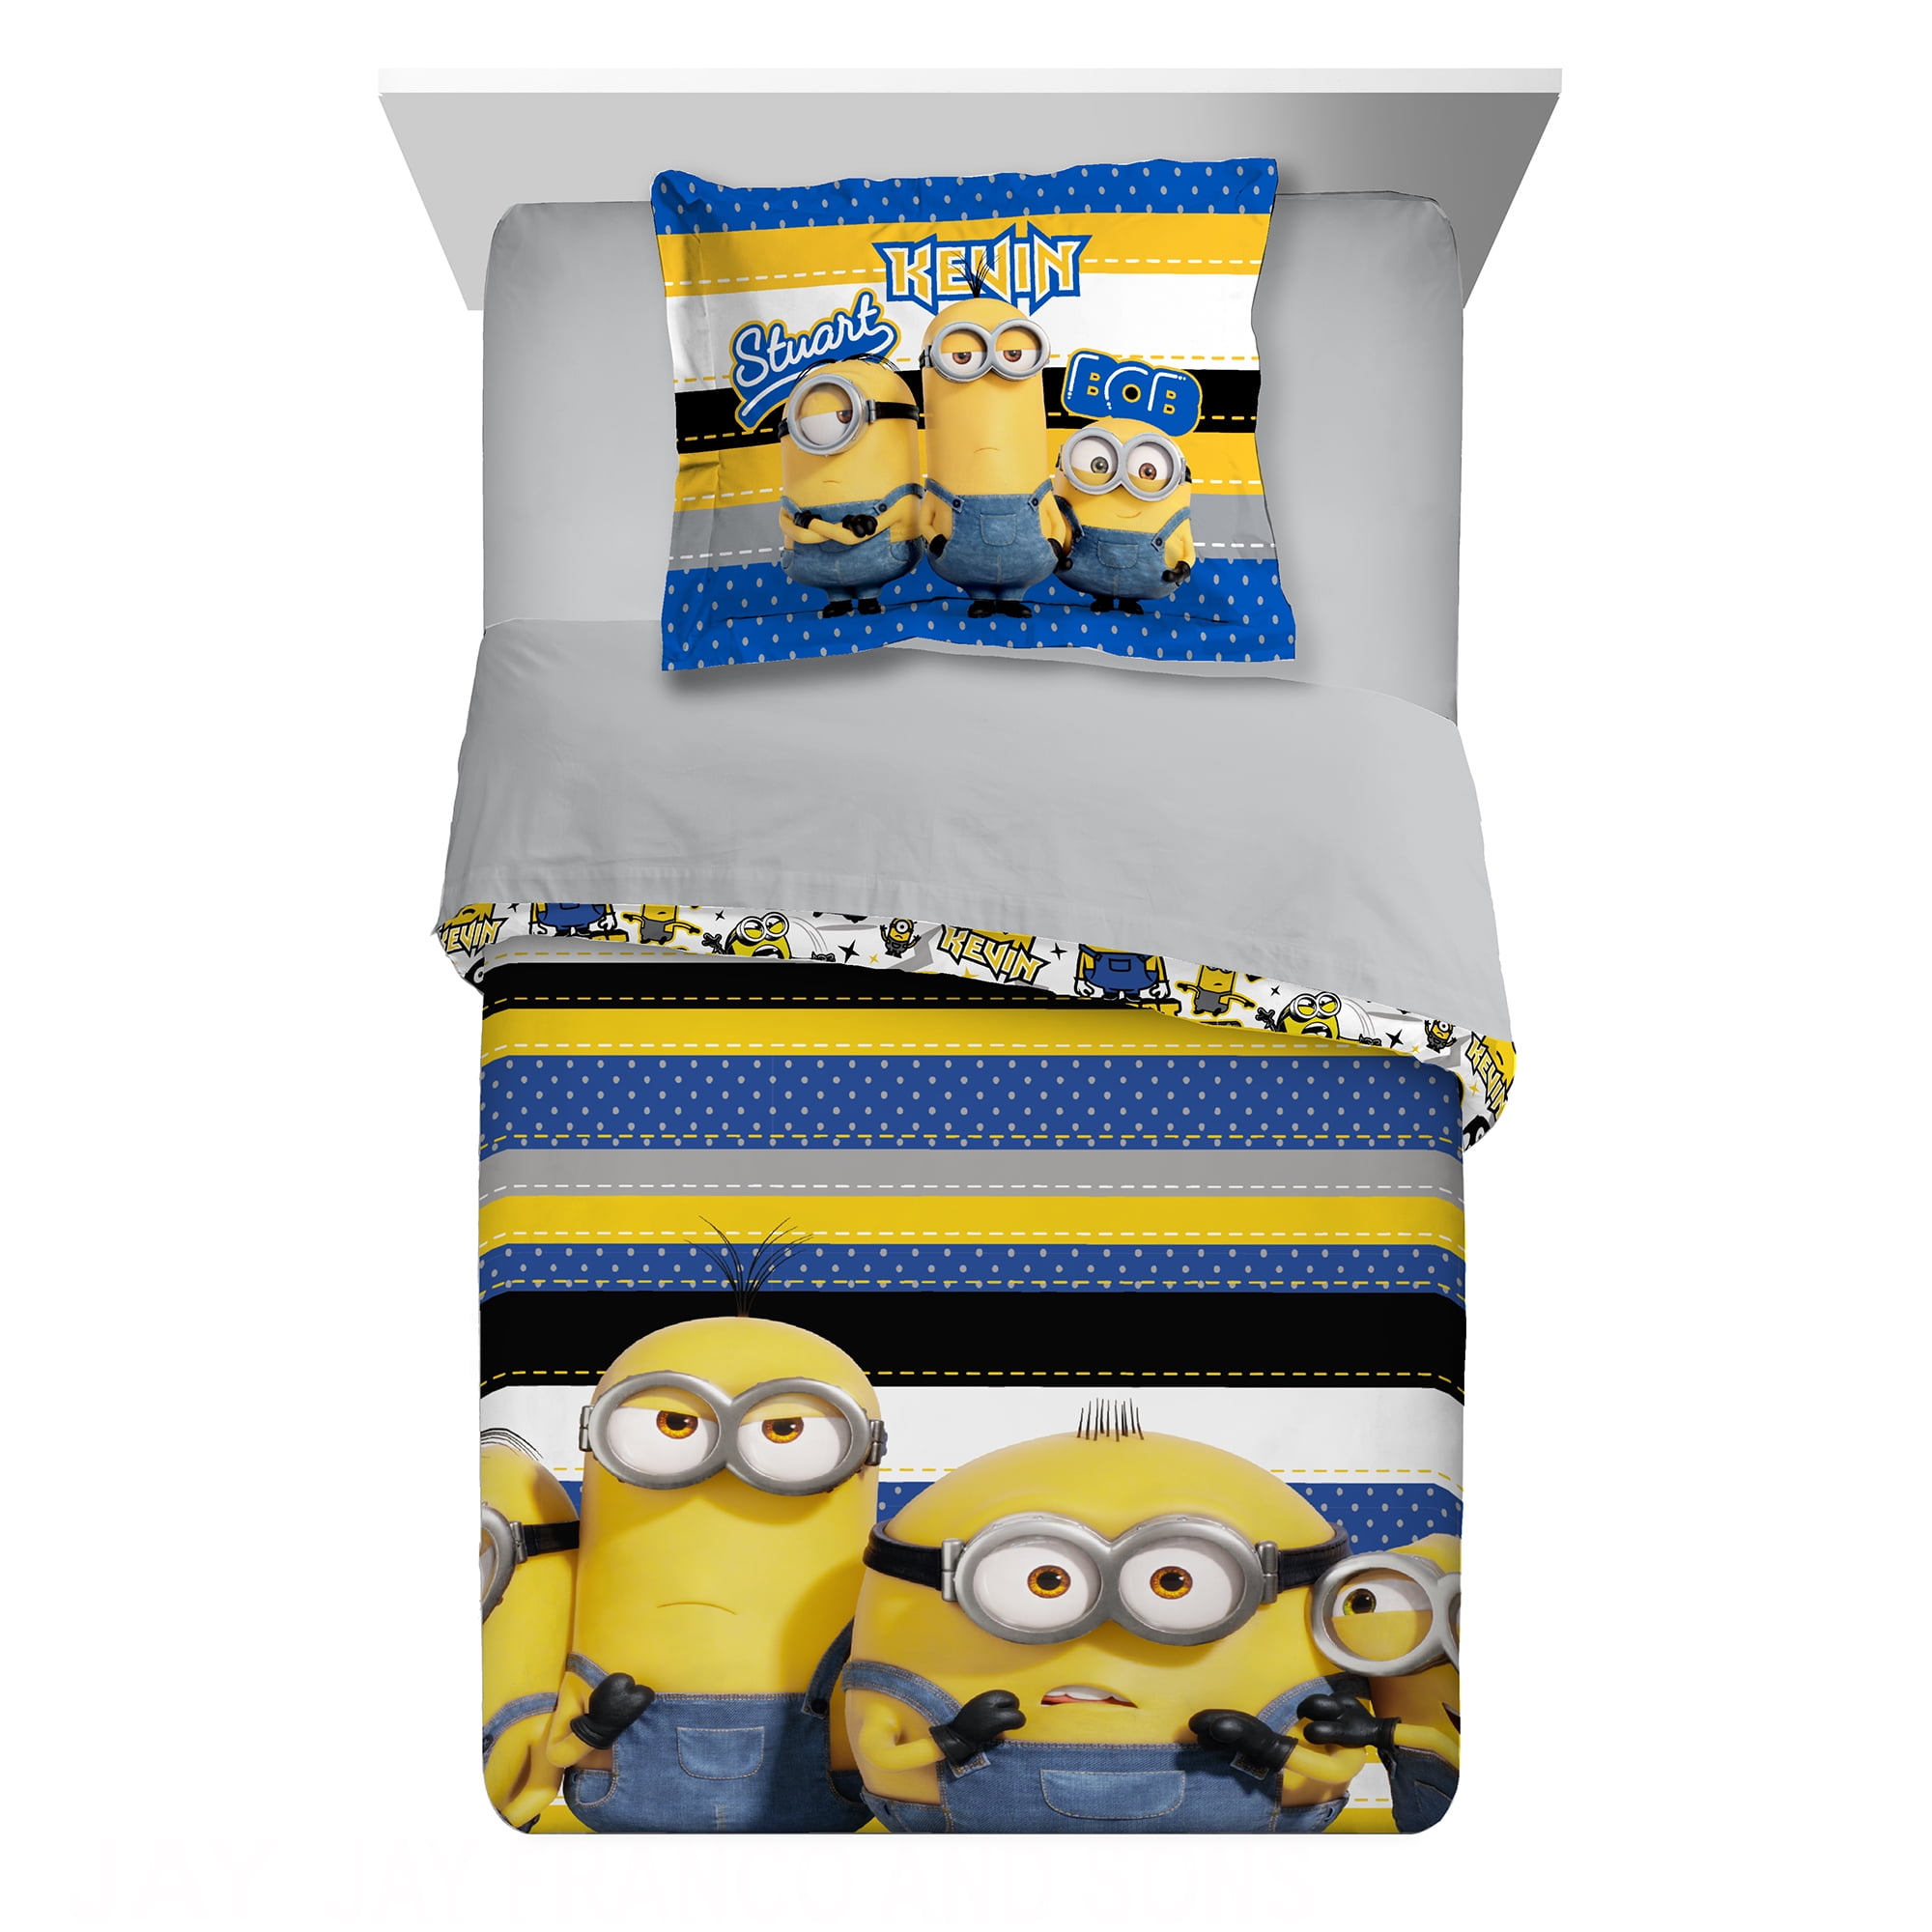 Despicable Me 3 Minions Blue Comforter Twin 